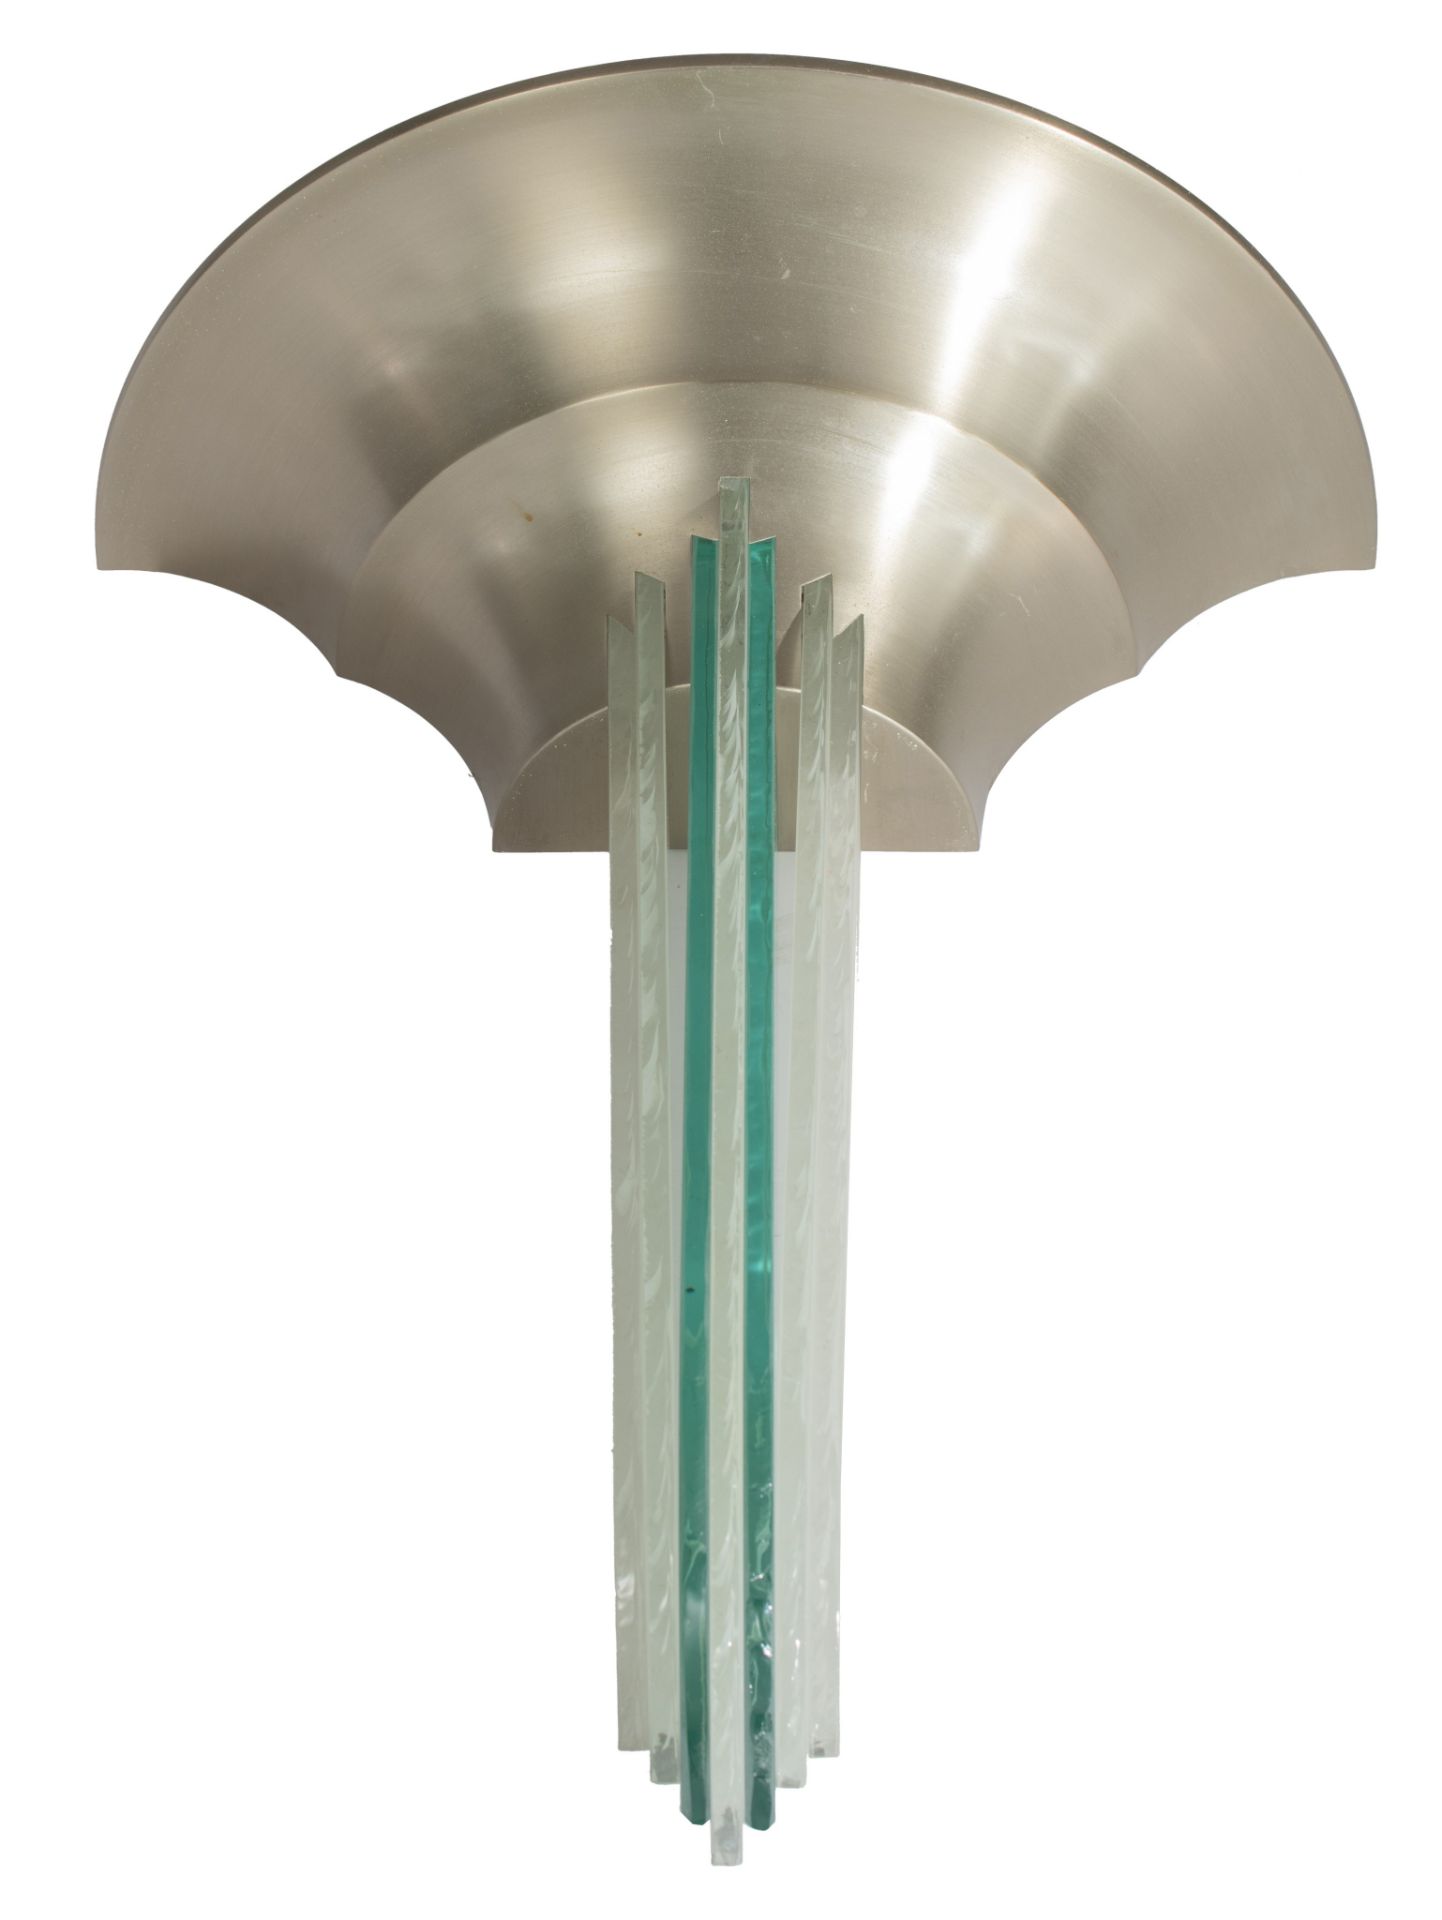 An Art Deco '652' wall light by Jean Perzel, glass and lacquered metal, H 60 - W 50 cm